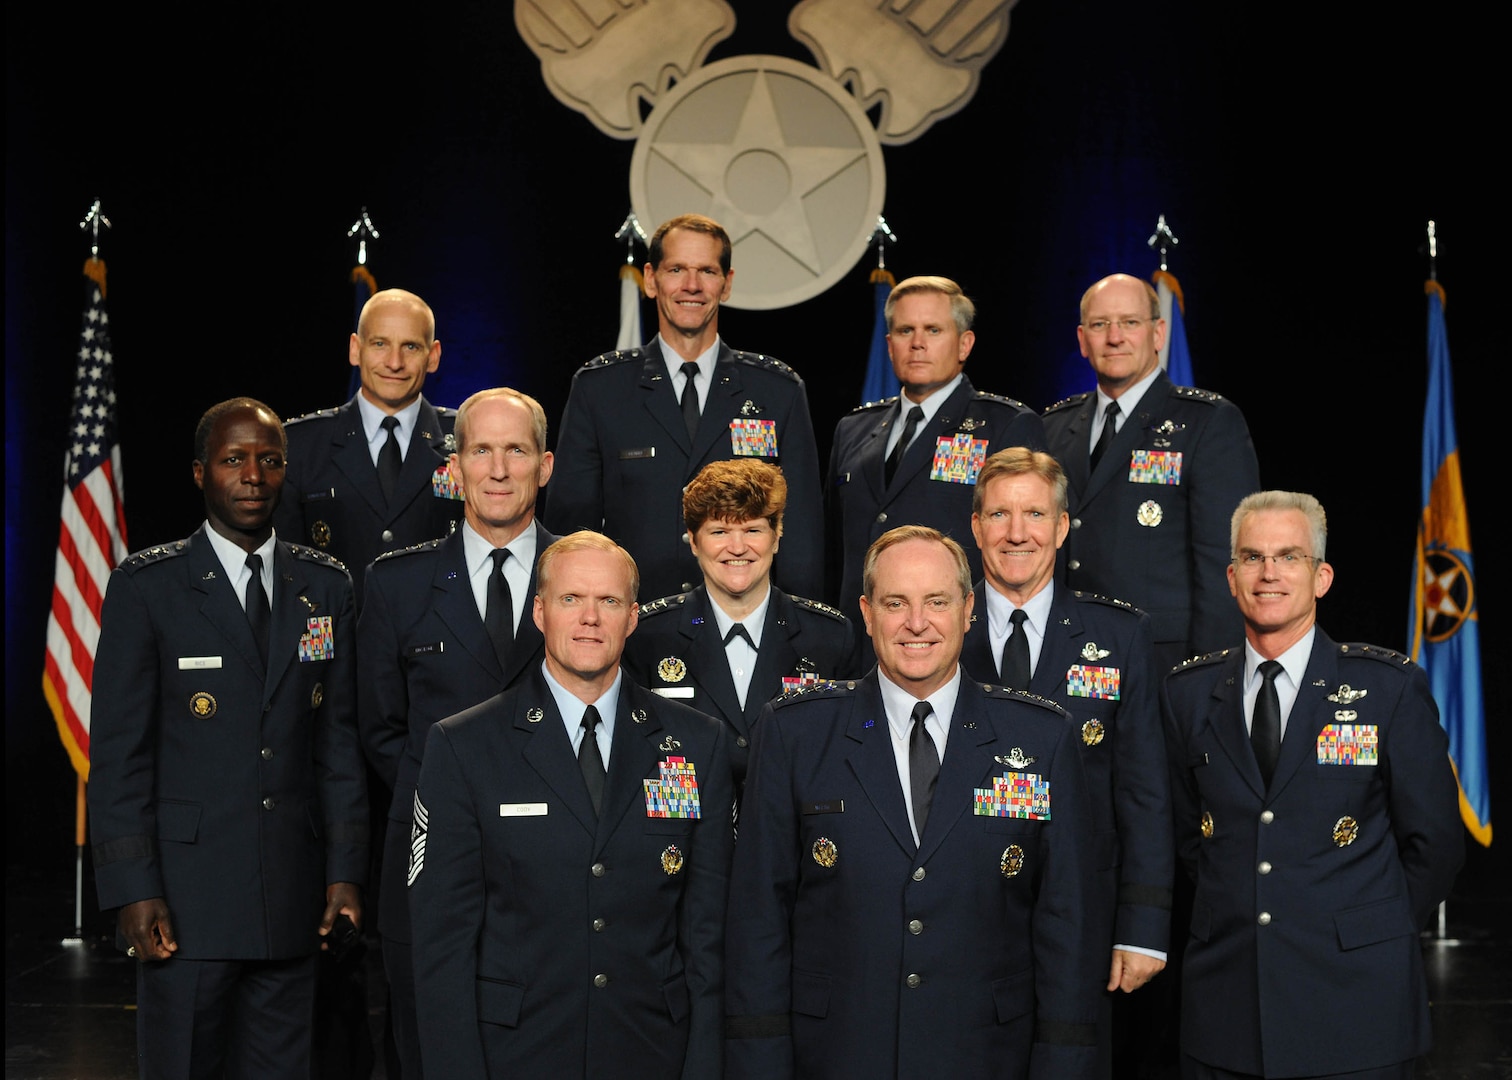 Air Force Chief of Staff Gen. Mark A. Welsh III moderated a forum of senior Air Force general officers on discussing topical issues at Air Force Association’s 2013 Air & Space Conference and Technology Exposition Sept. 18, 2013, Washington, D.C. It’s an opportunity to engaged the Air Forces top uniformed leadership in candid and thought-provoking dialogue on current issues.